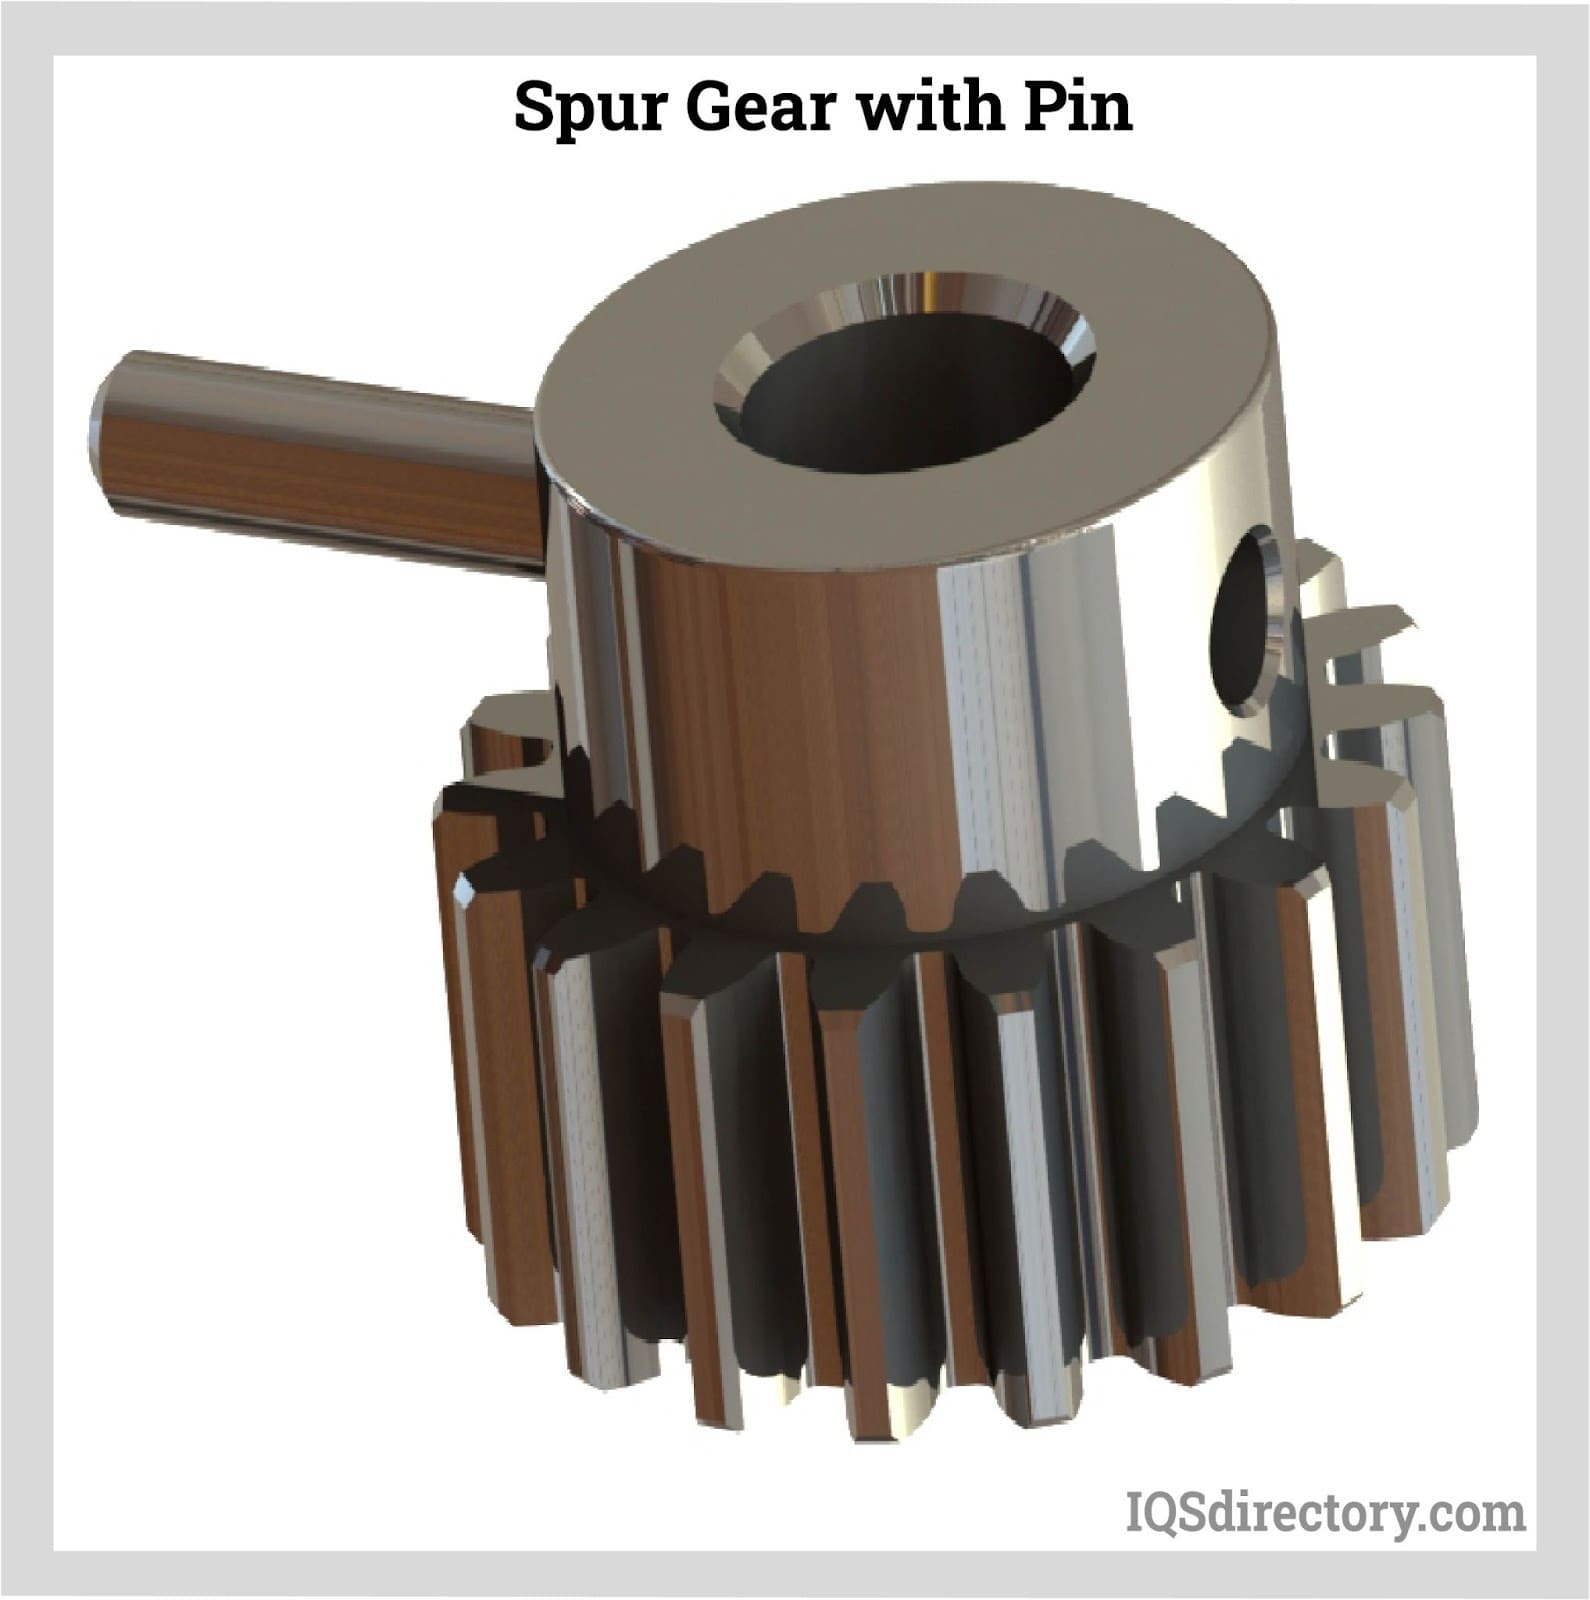 Spur Gear with Pin